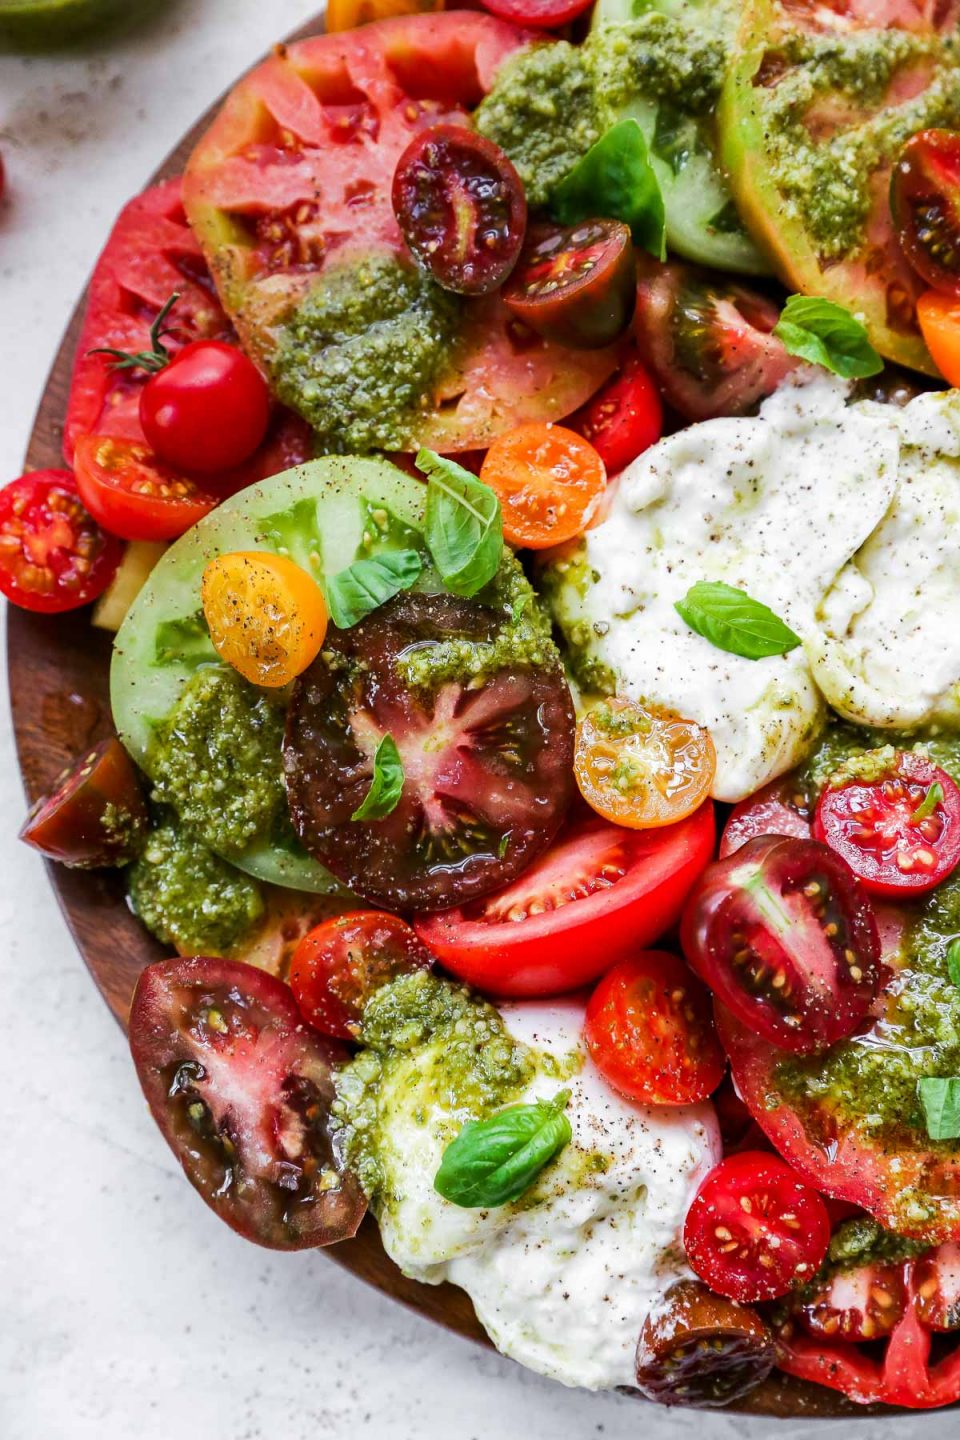 Heirloom tomato burrata salad arranged on a large wooden serving board, topped with vibrant green fresh pesto sauce. The board is surrounded by a few slices of grilled bread & some red cherry tomatoes.